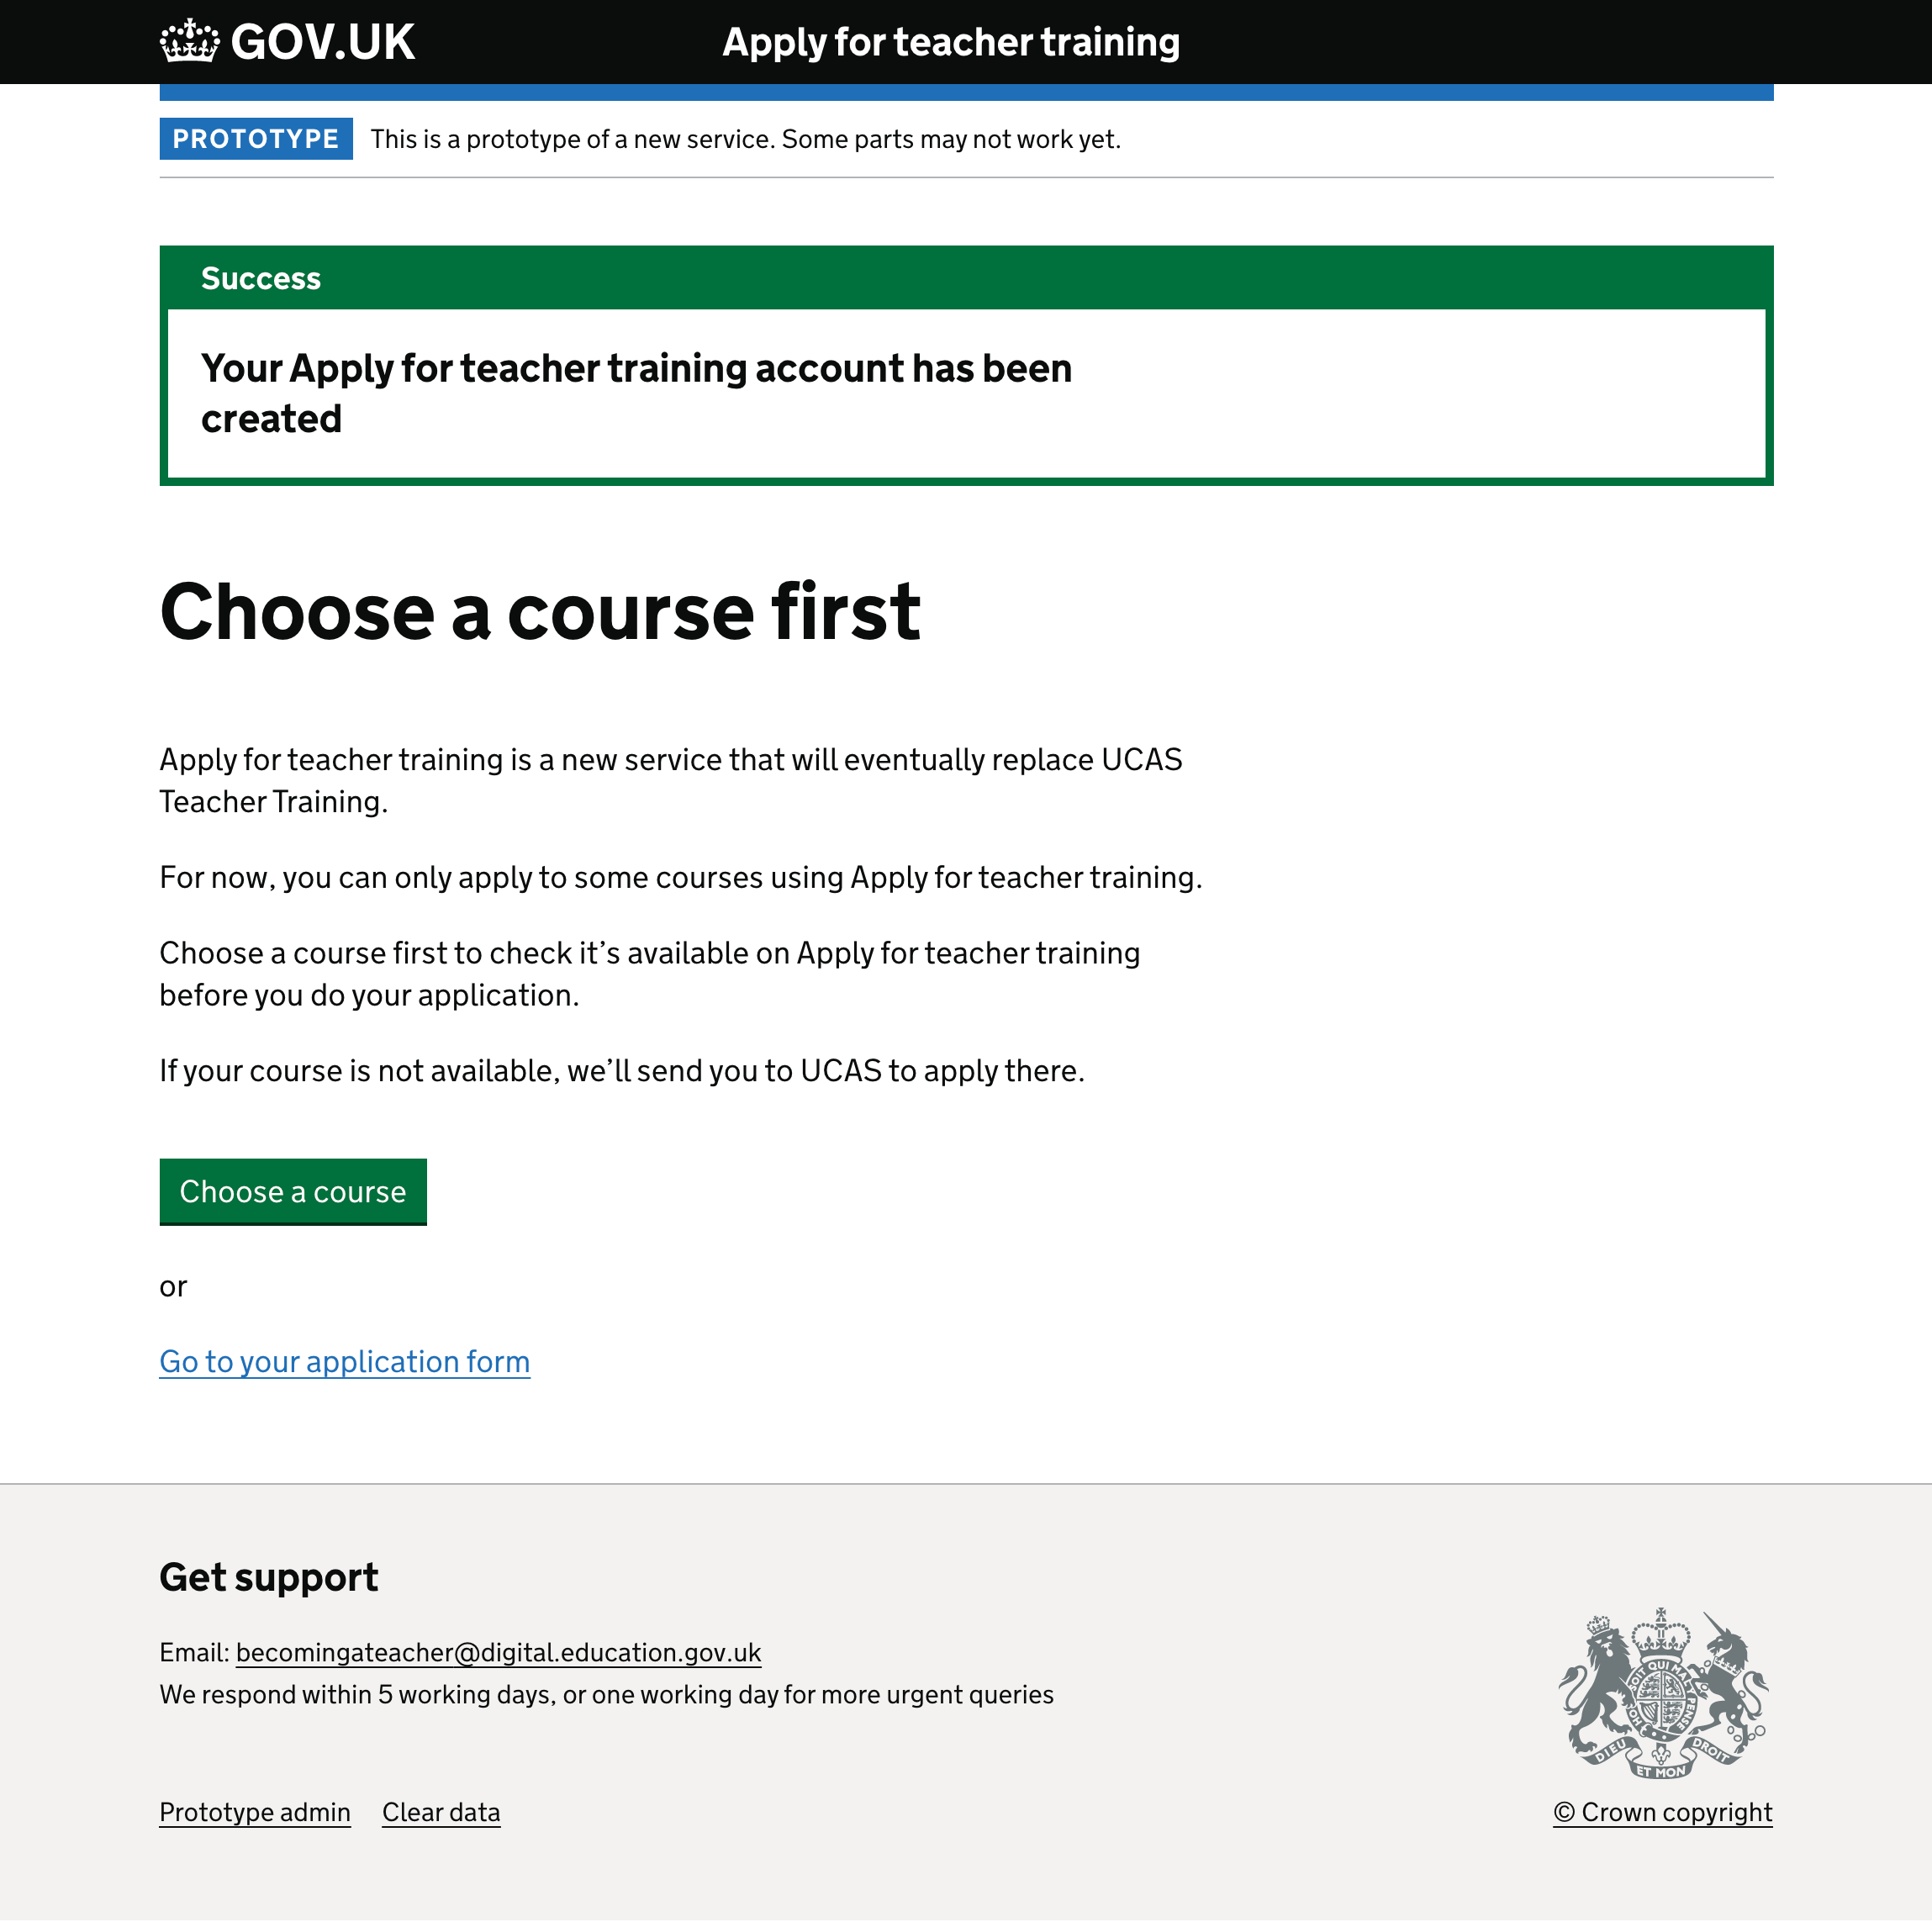 Screenshot of 'Choose a course first' page.